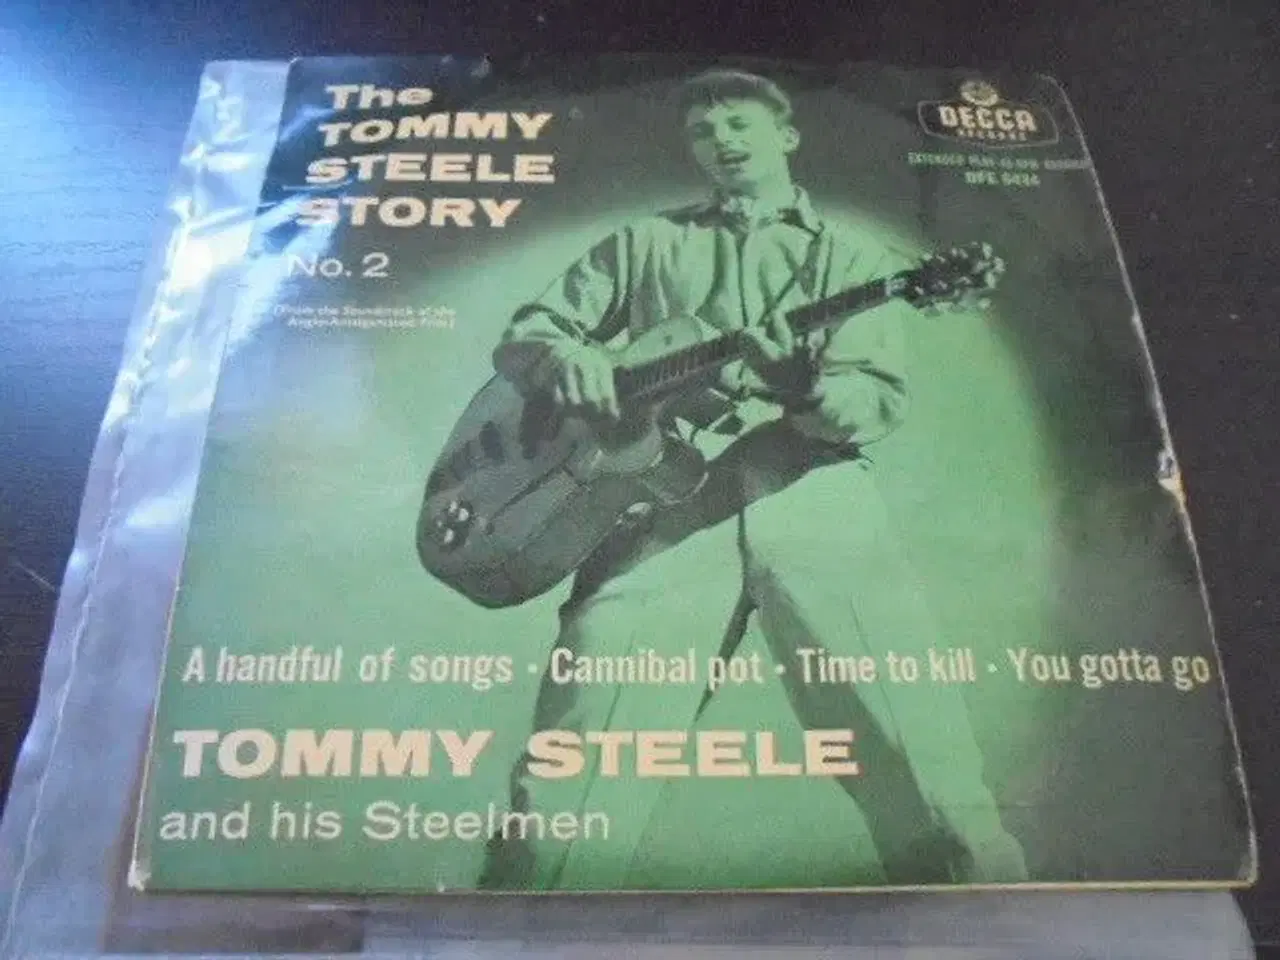 Billede 1 - EP: The Tommy Steele Story vol. 2 